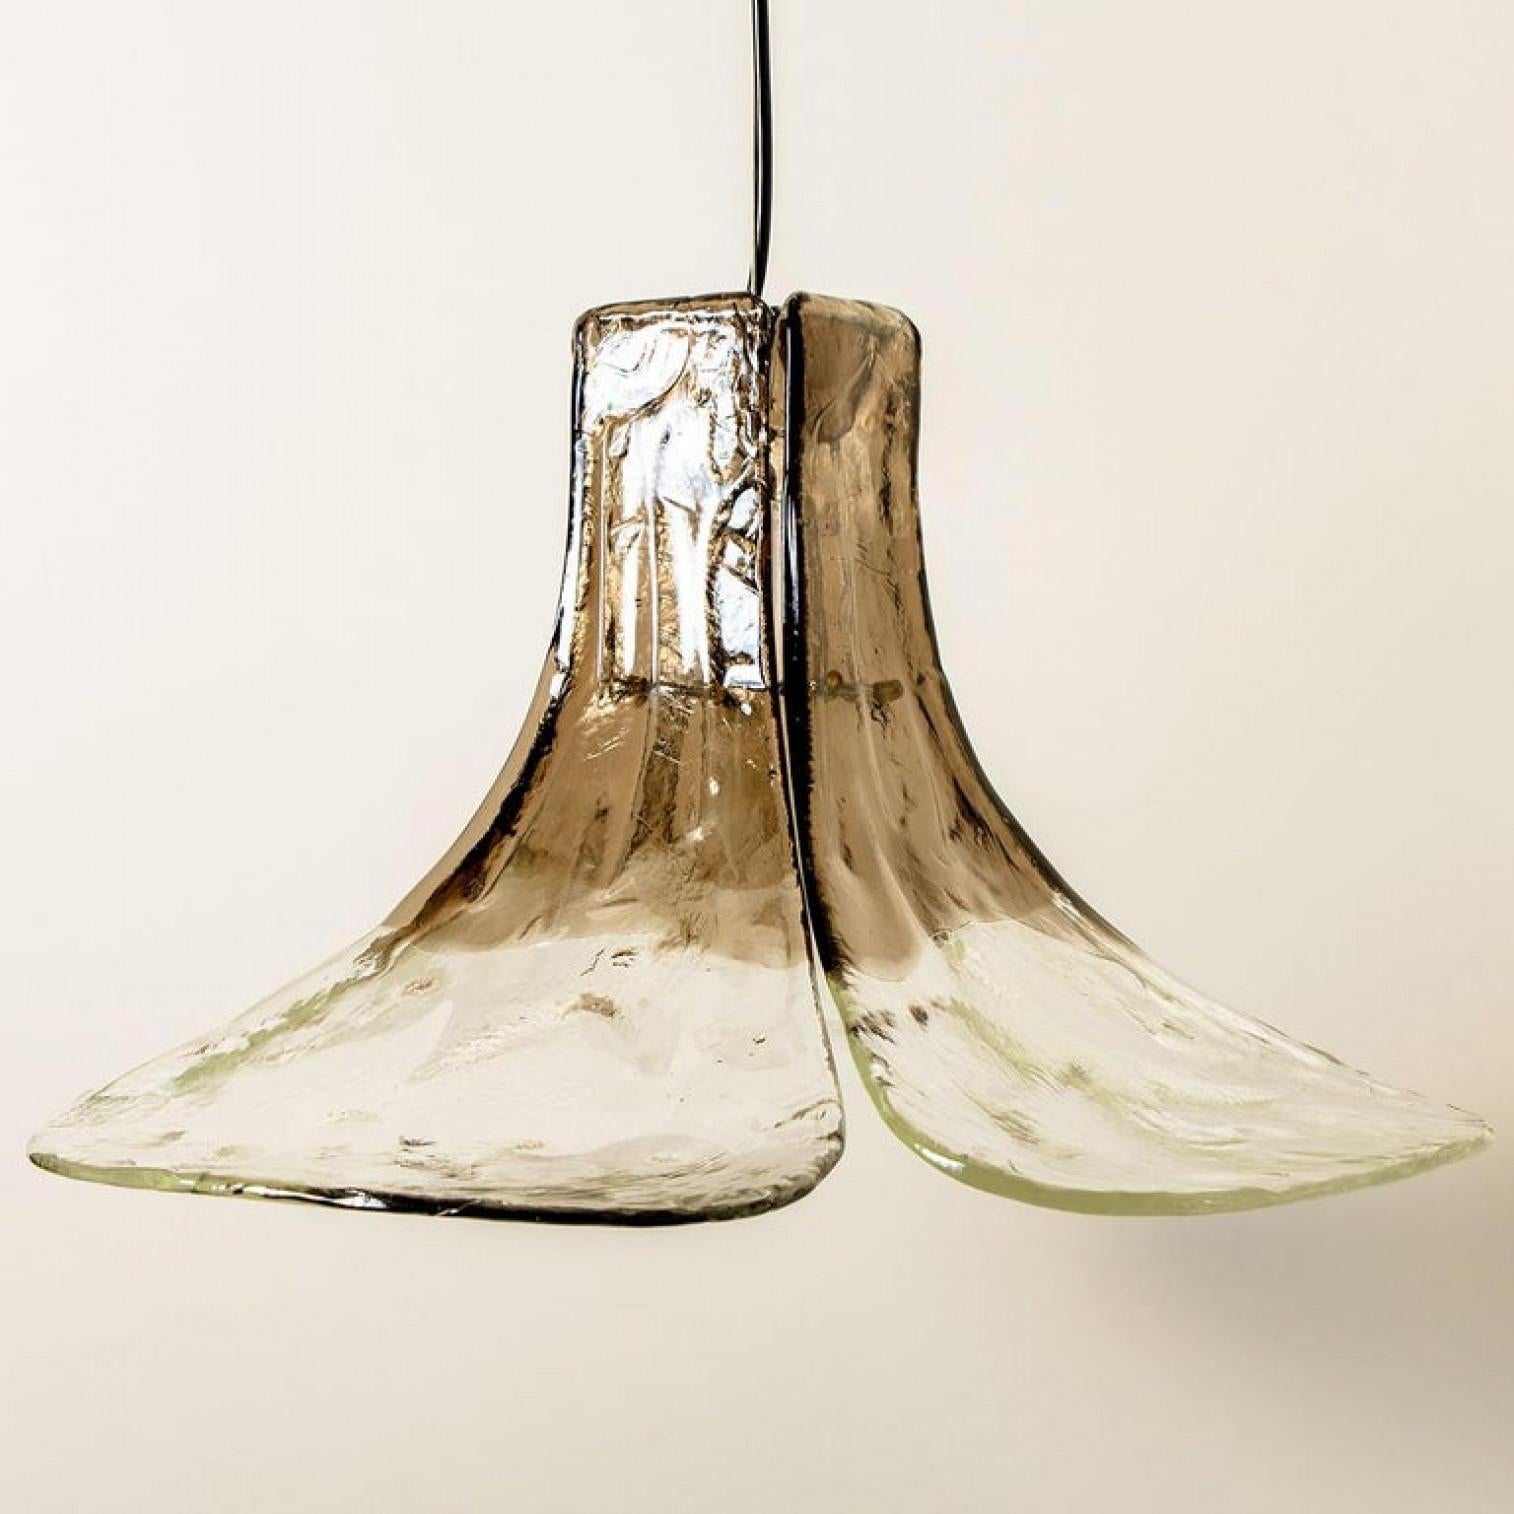 1 of the 3 Pendant Lights by Carlo Nason for Mazzega 1